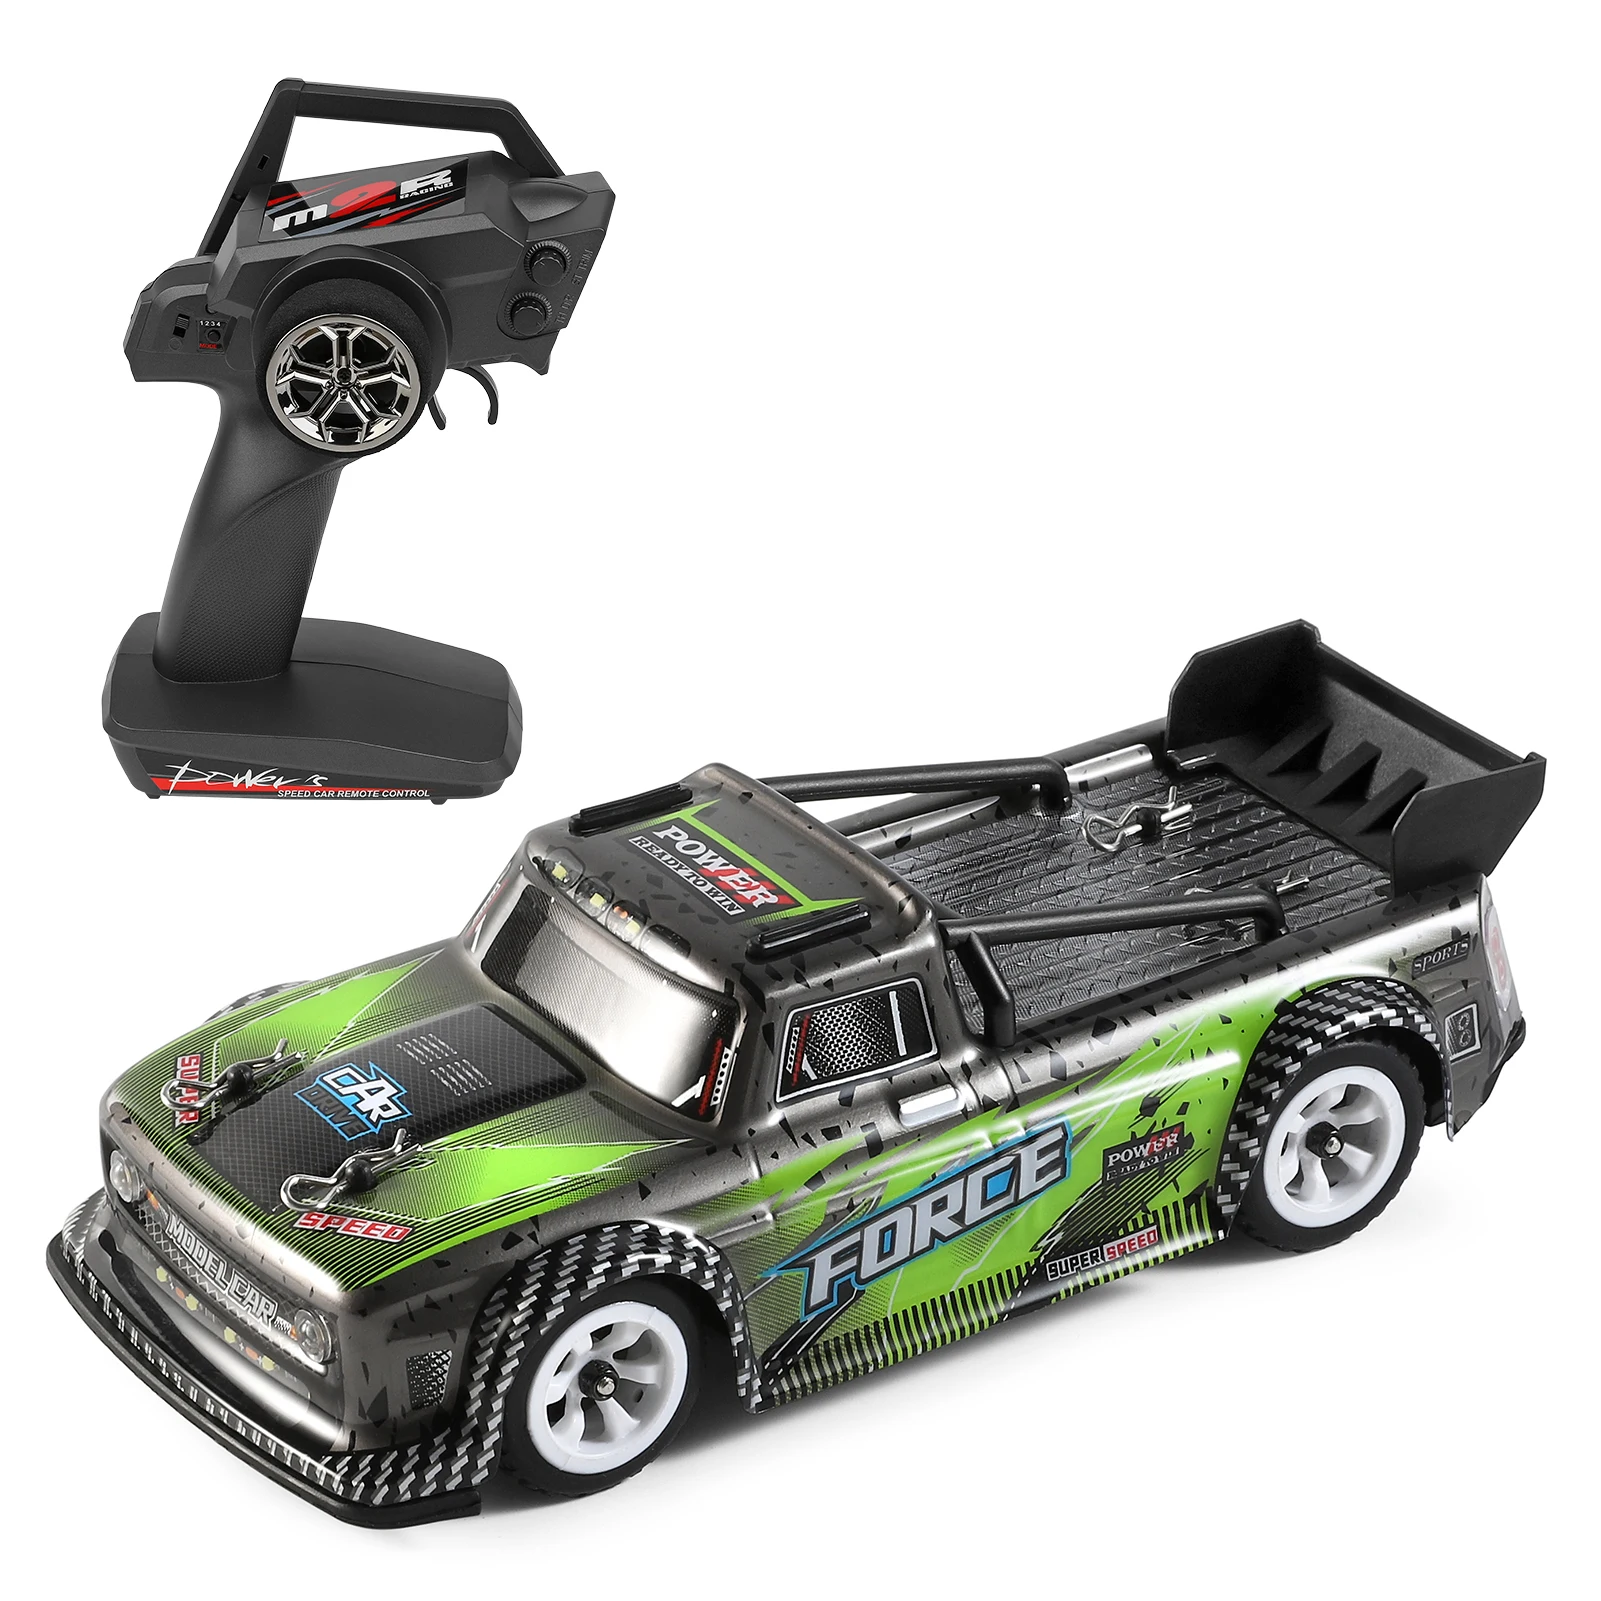 

WLtoys 284131 RC Car 2.4G Racing Car 30 KM/H Metal Chassis 4WD Electric High Speed Off-Road Drift Remote Control Toys